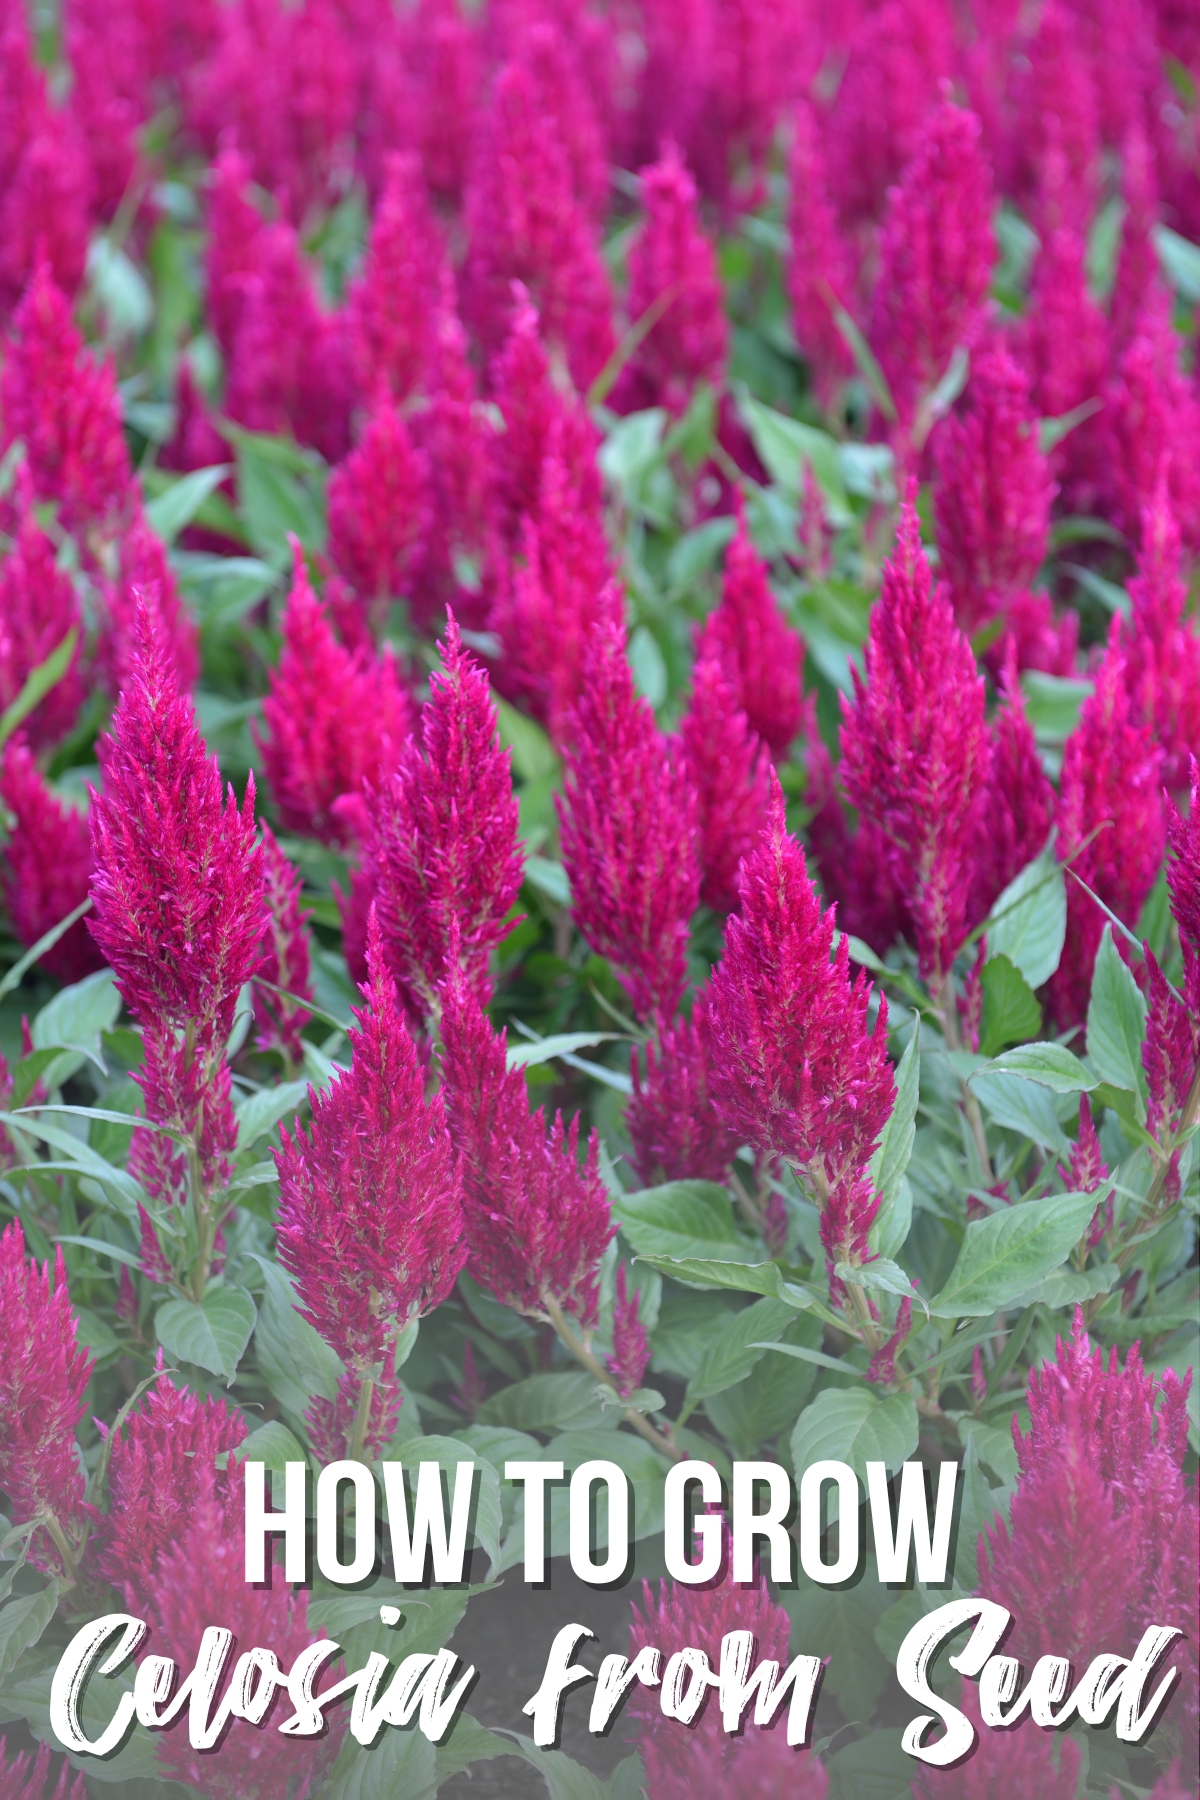 how to grow celosia text overlay on a field of pink celosia blooms